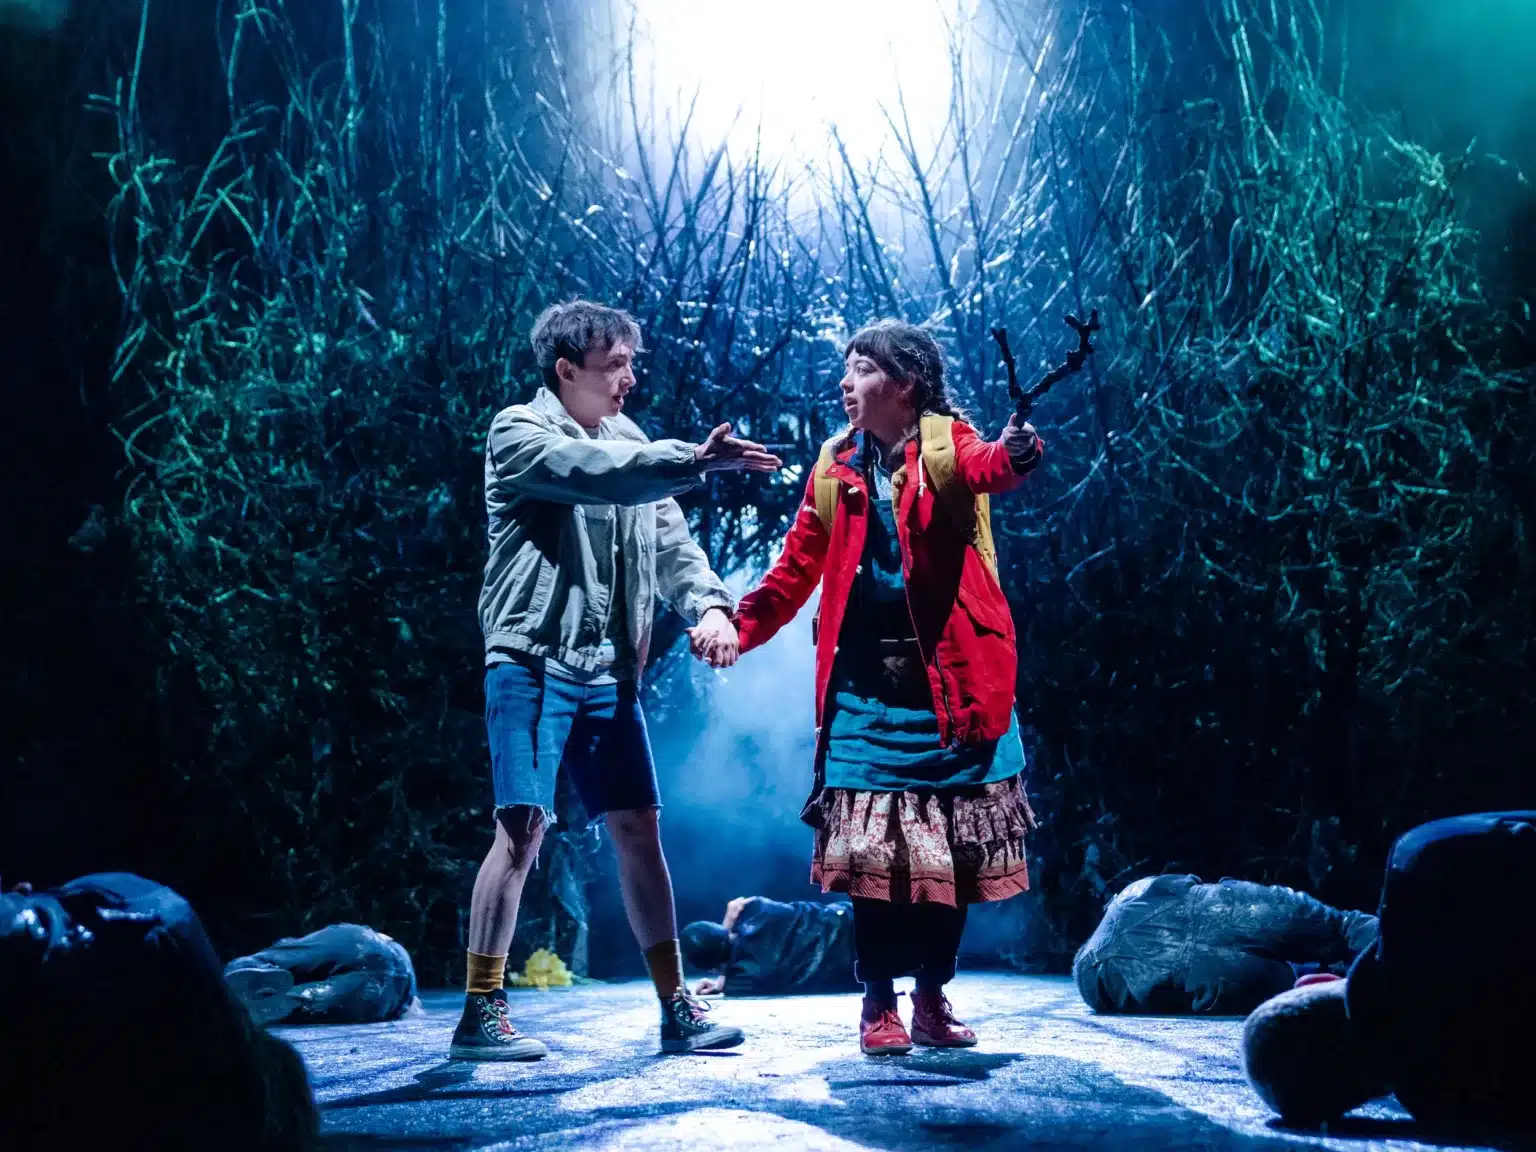 Samuel Blenkin And Marli Siu, The Original National Theatre Cast Of The Ocean At The End Of The Lane Photographer Manuel Harlan